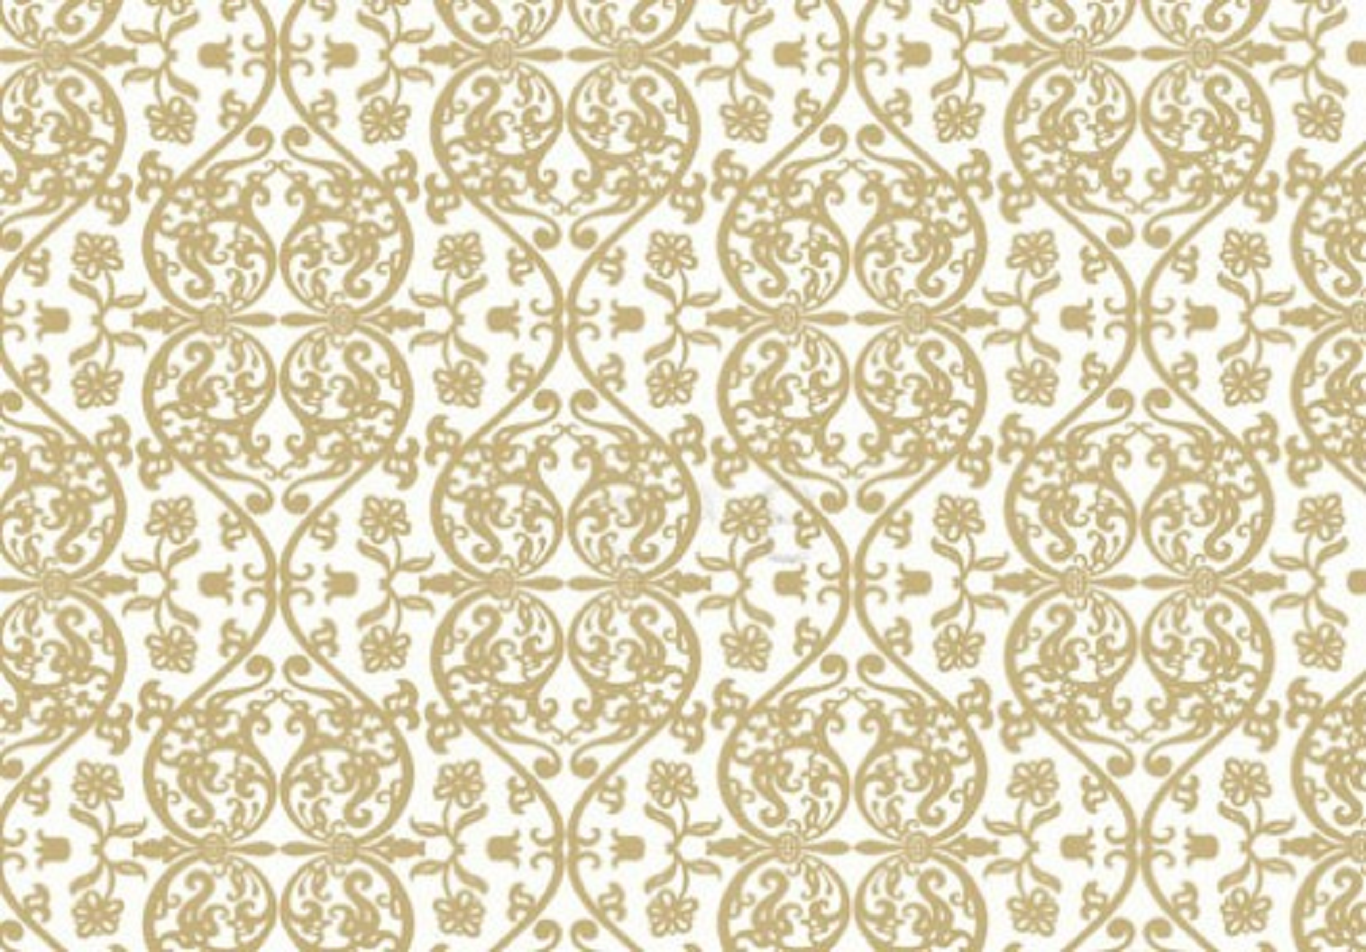 A stunning gold and white background featuring a unique design